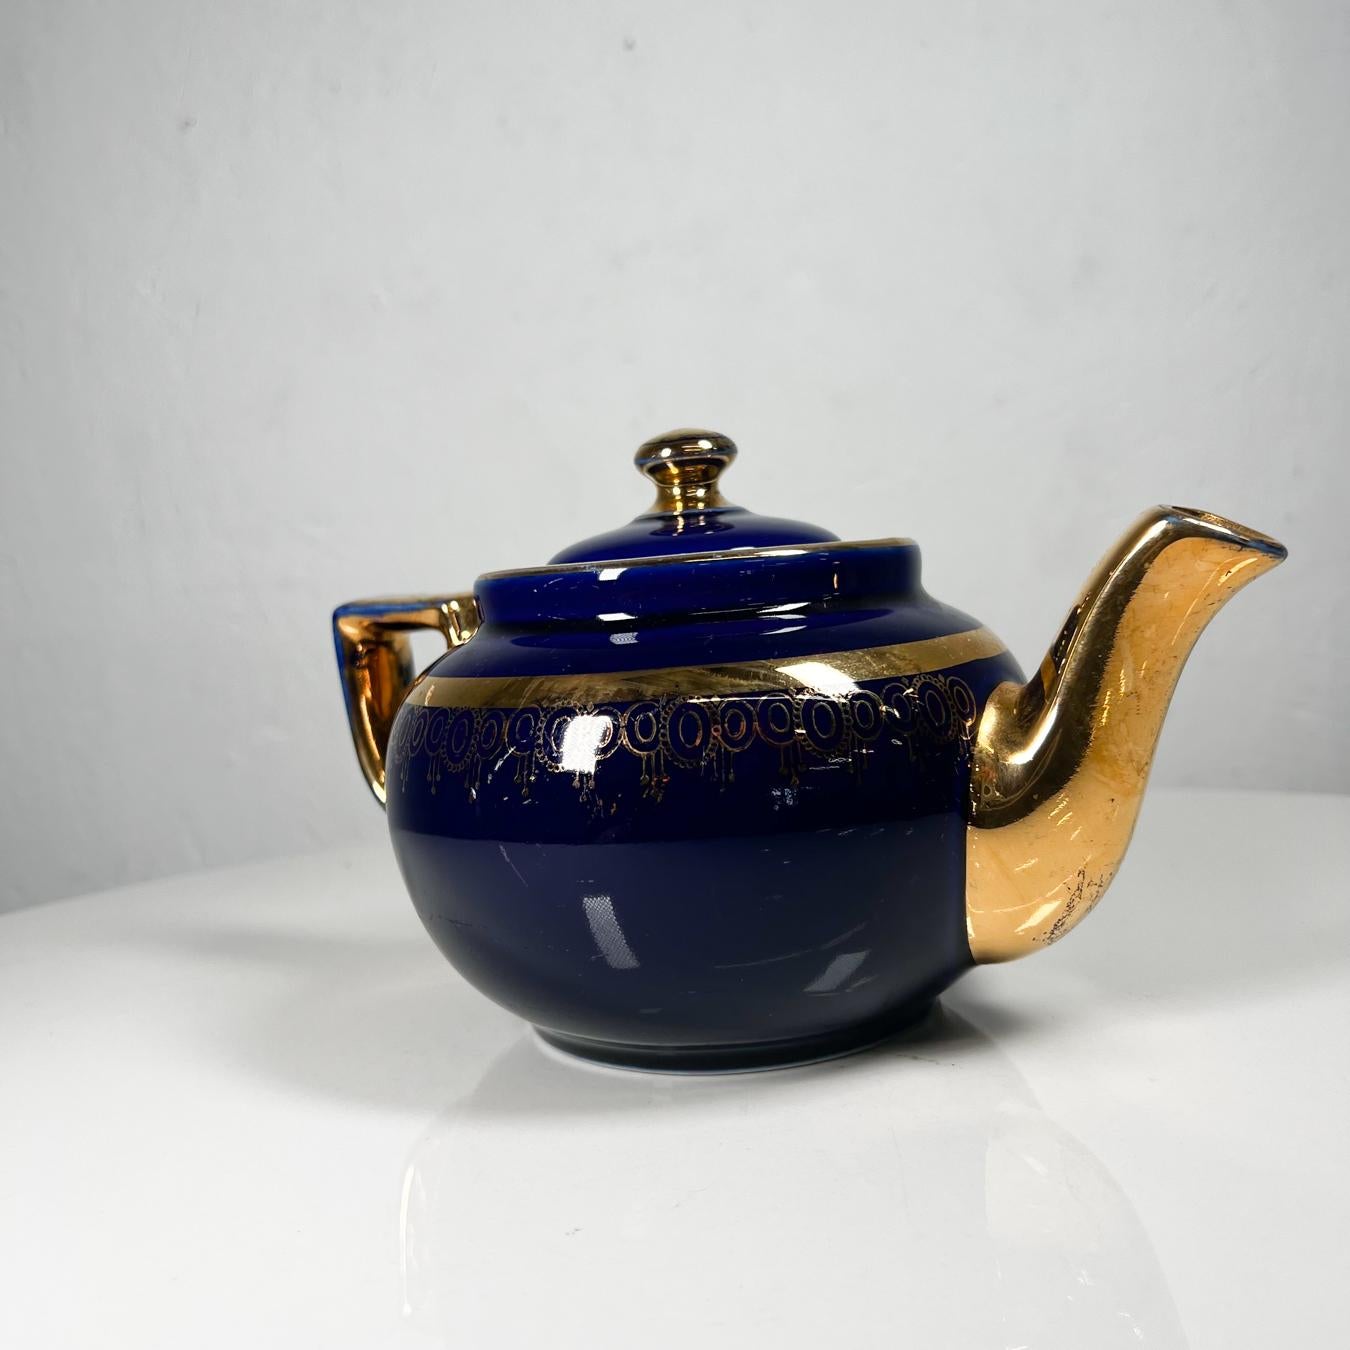 1950s Modern Decorative Cobalt Blue and Gold Hall China Tea Pot USA In Good Condition For Sale In Chula Vista, CA